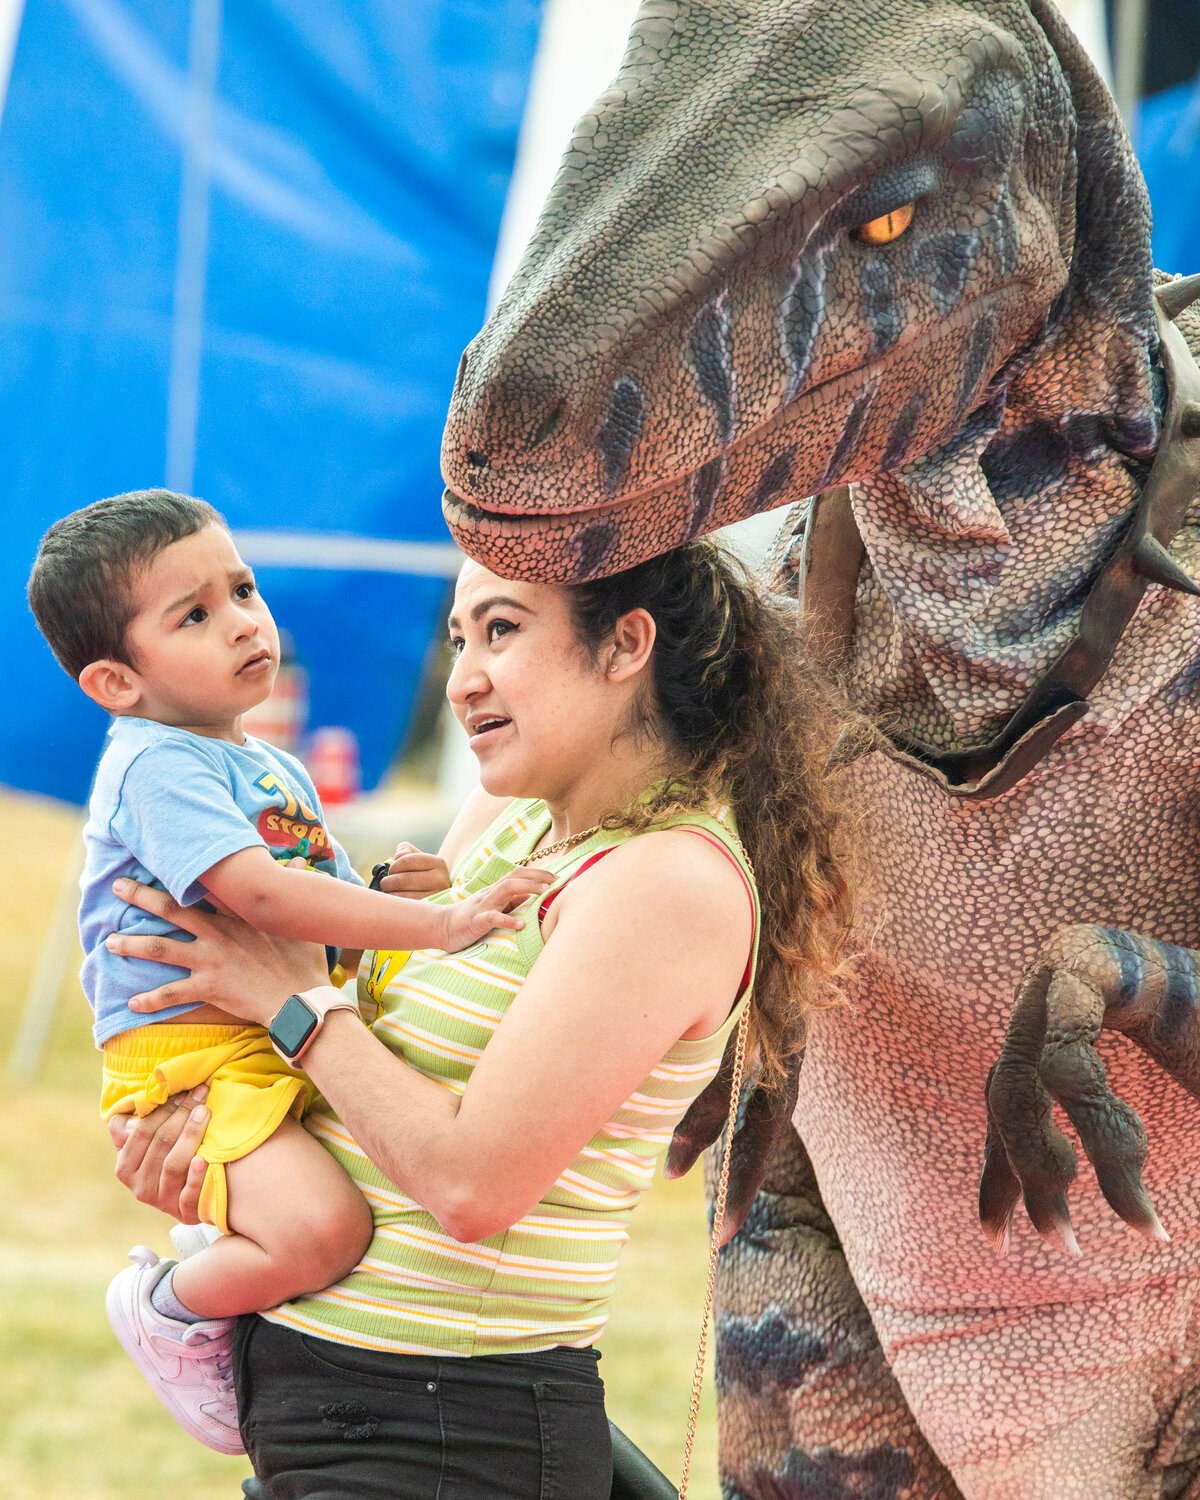 Visitors at the Southwest Washington Fairgrounds get up close to a raptor during the Jordan World Circus show on Wednesday, May 31.